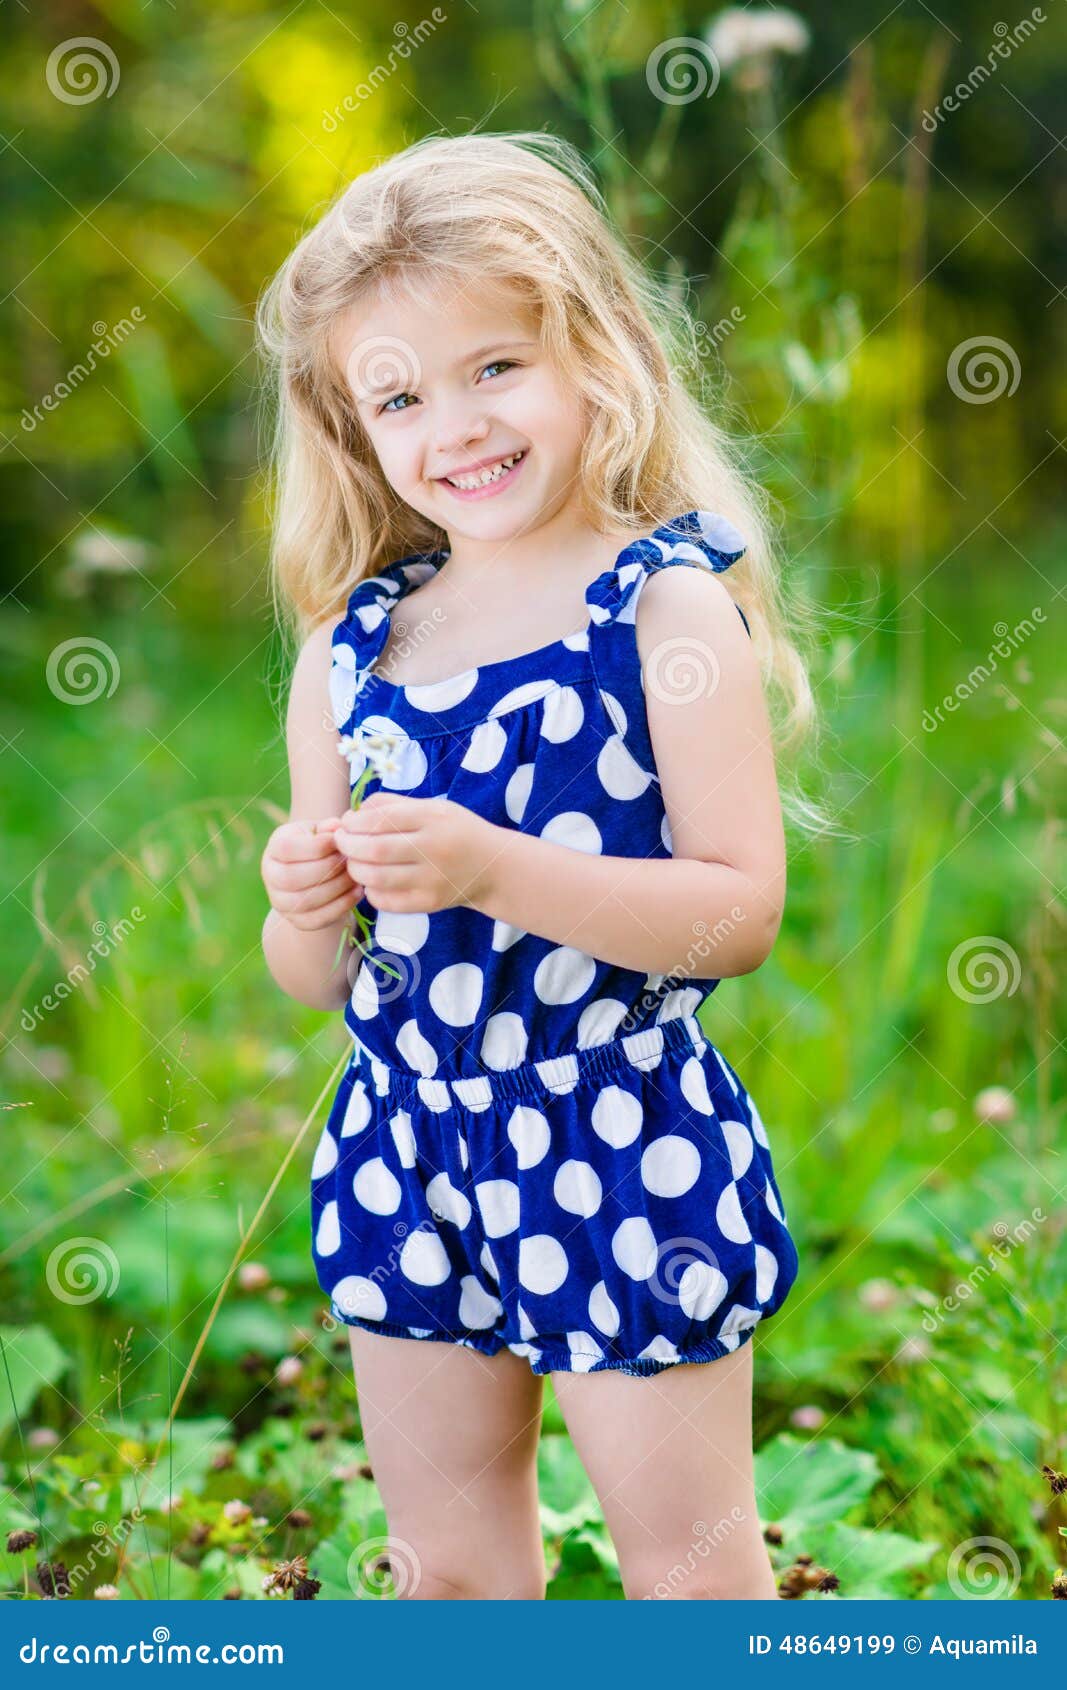 Beautiful Smiling Little Girl with Long Blond Curly Hair Stock Image ...